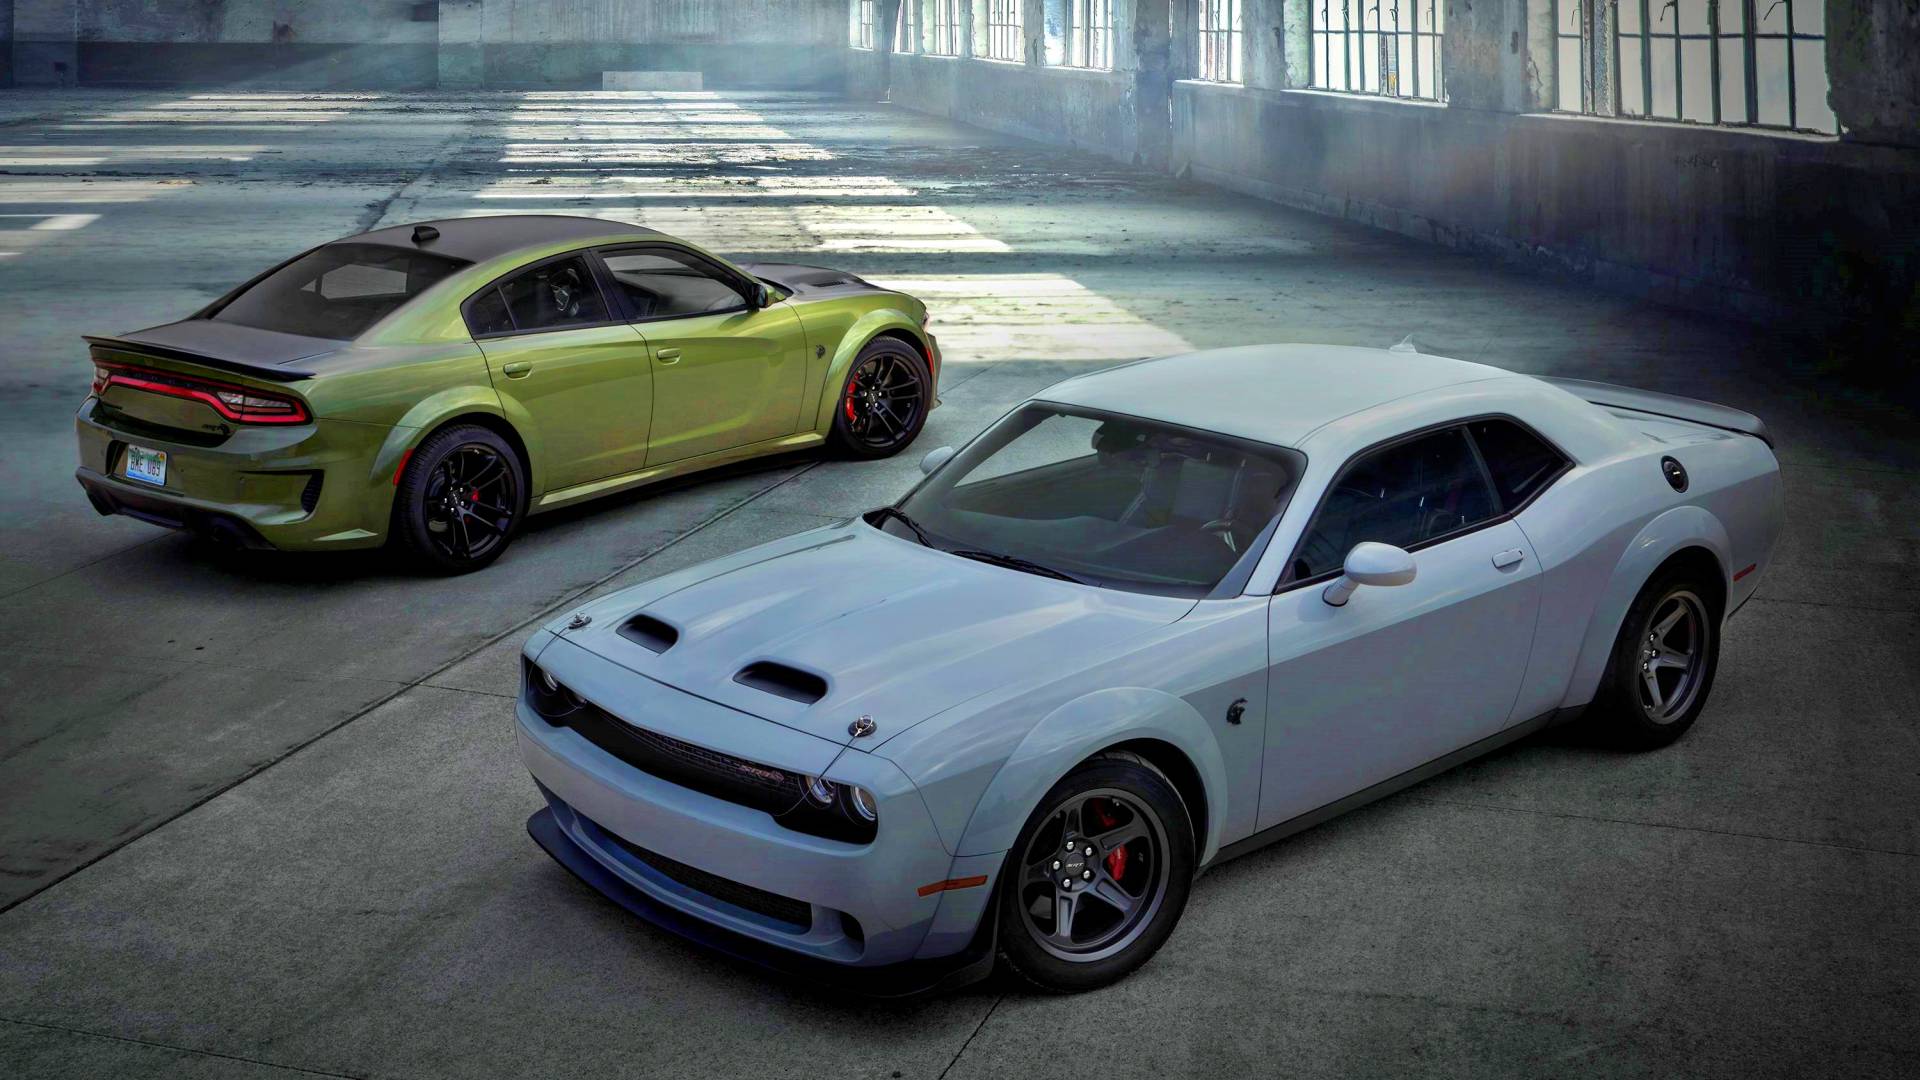 Dodge Charger and Challenger